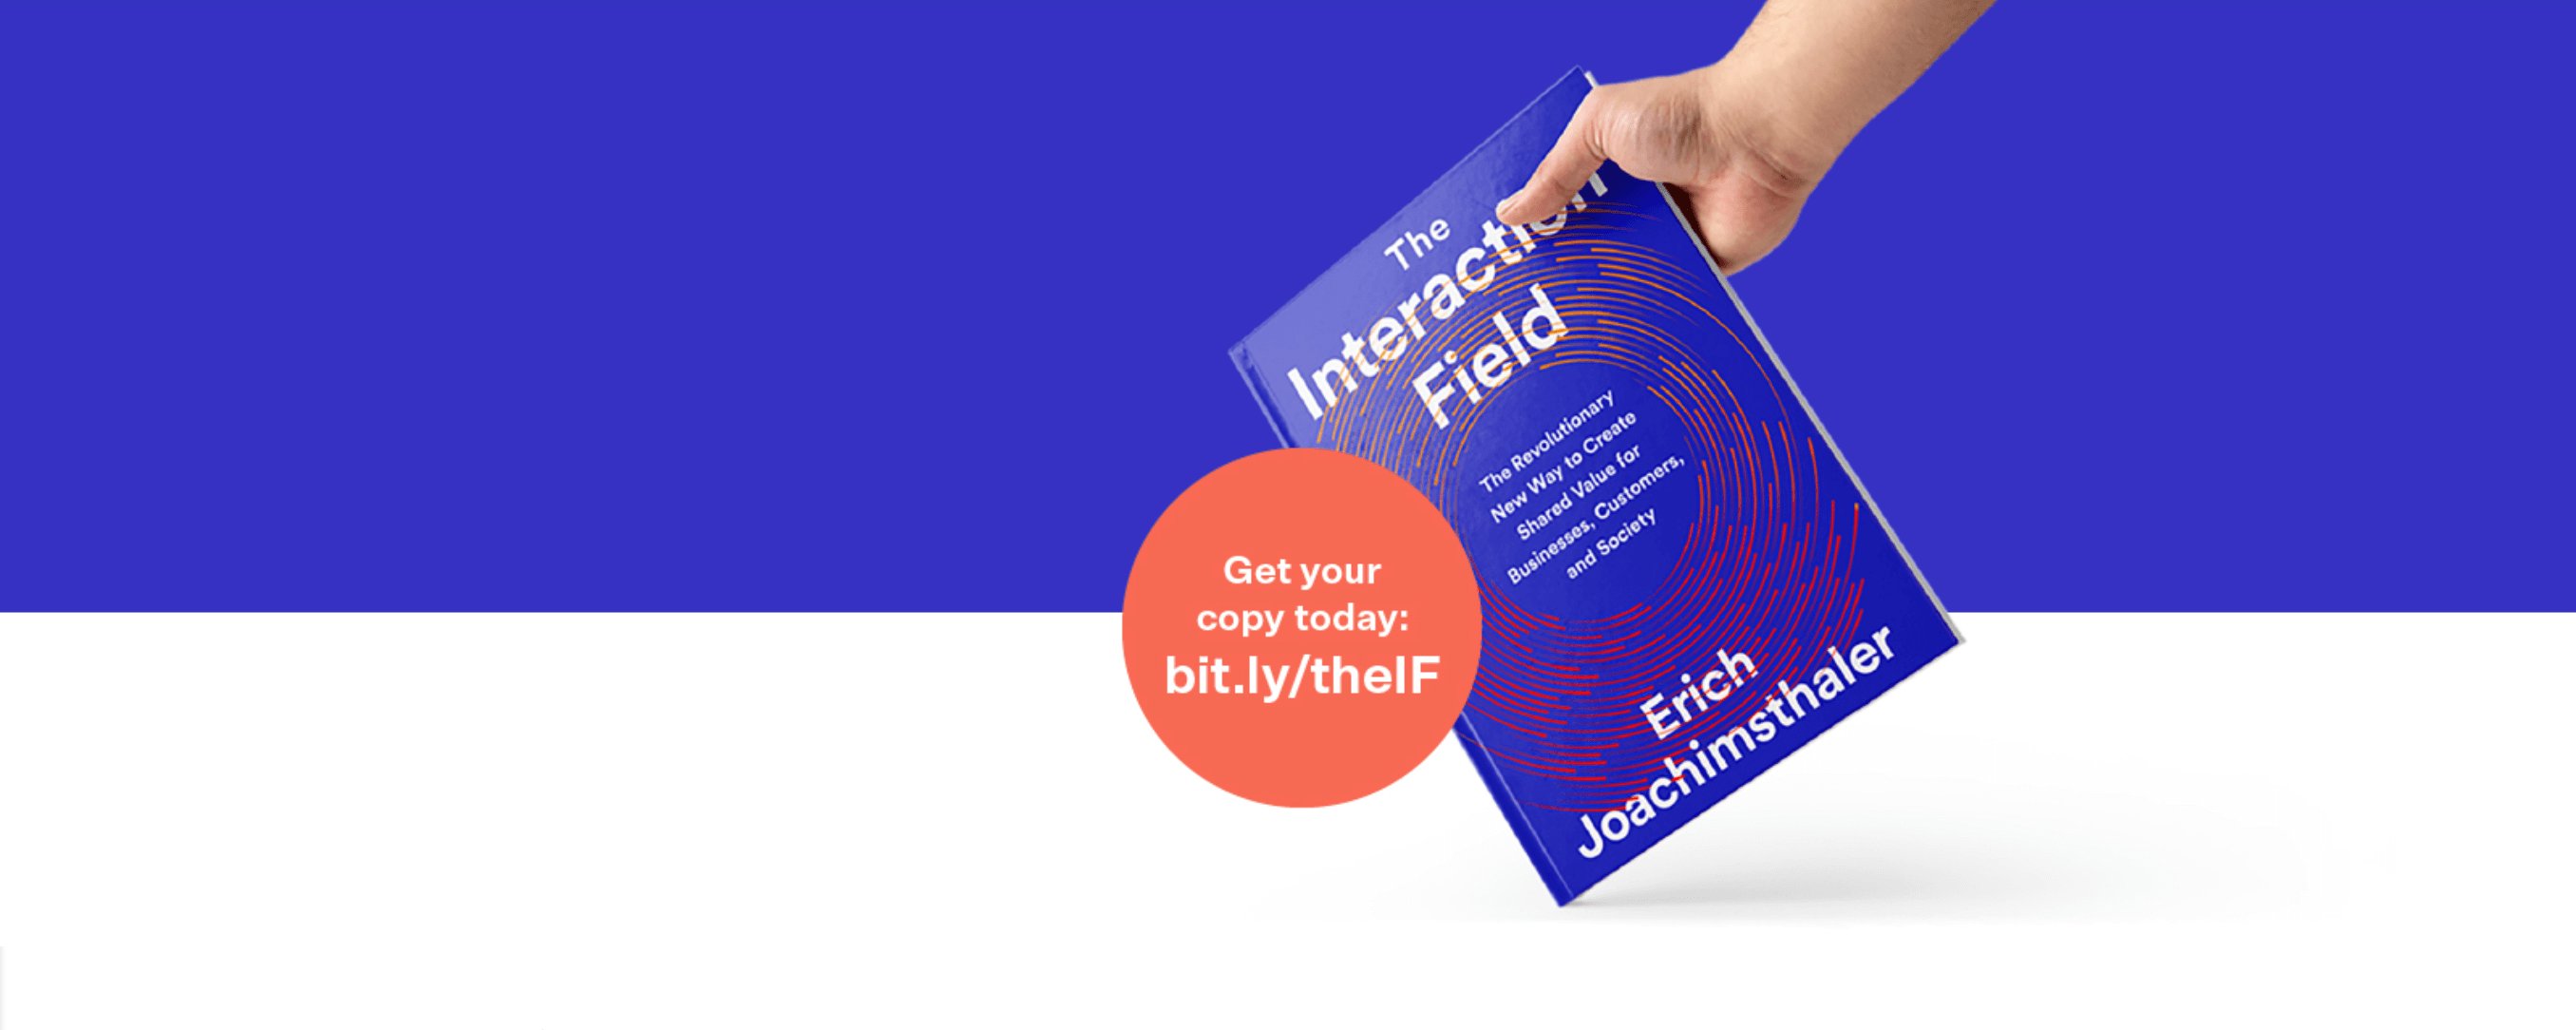 Get Your Copy of The Interaction Field at bit.ly/theIF